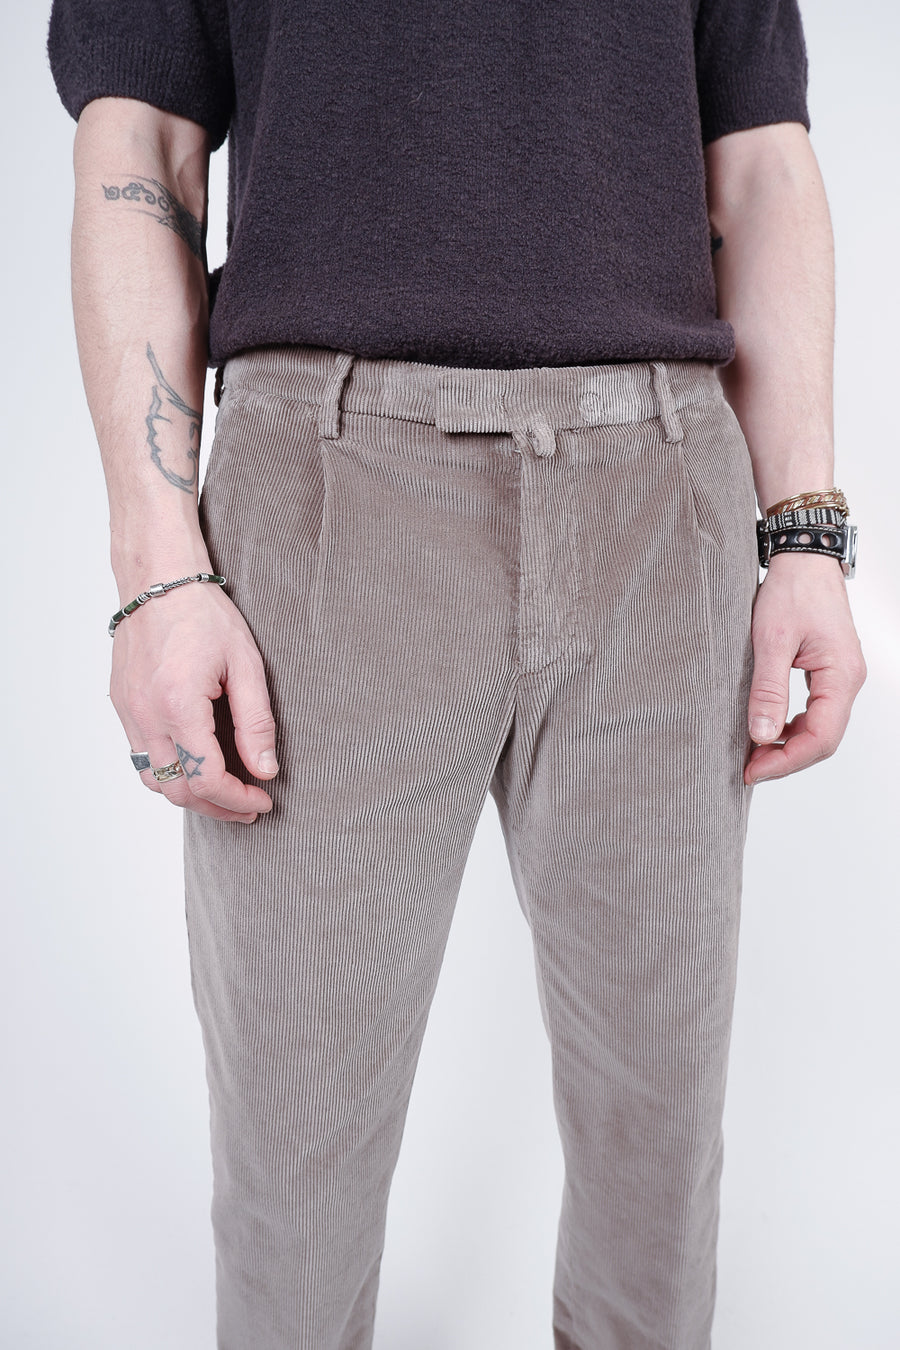 Buy the Briglia Italian Corduroy Trouser in Taupe at Intro. Spend £50 for free UK delivery. Official stockists. We ship worldwide.